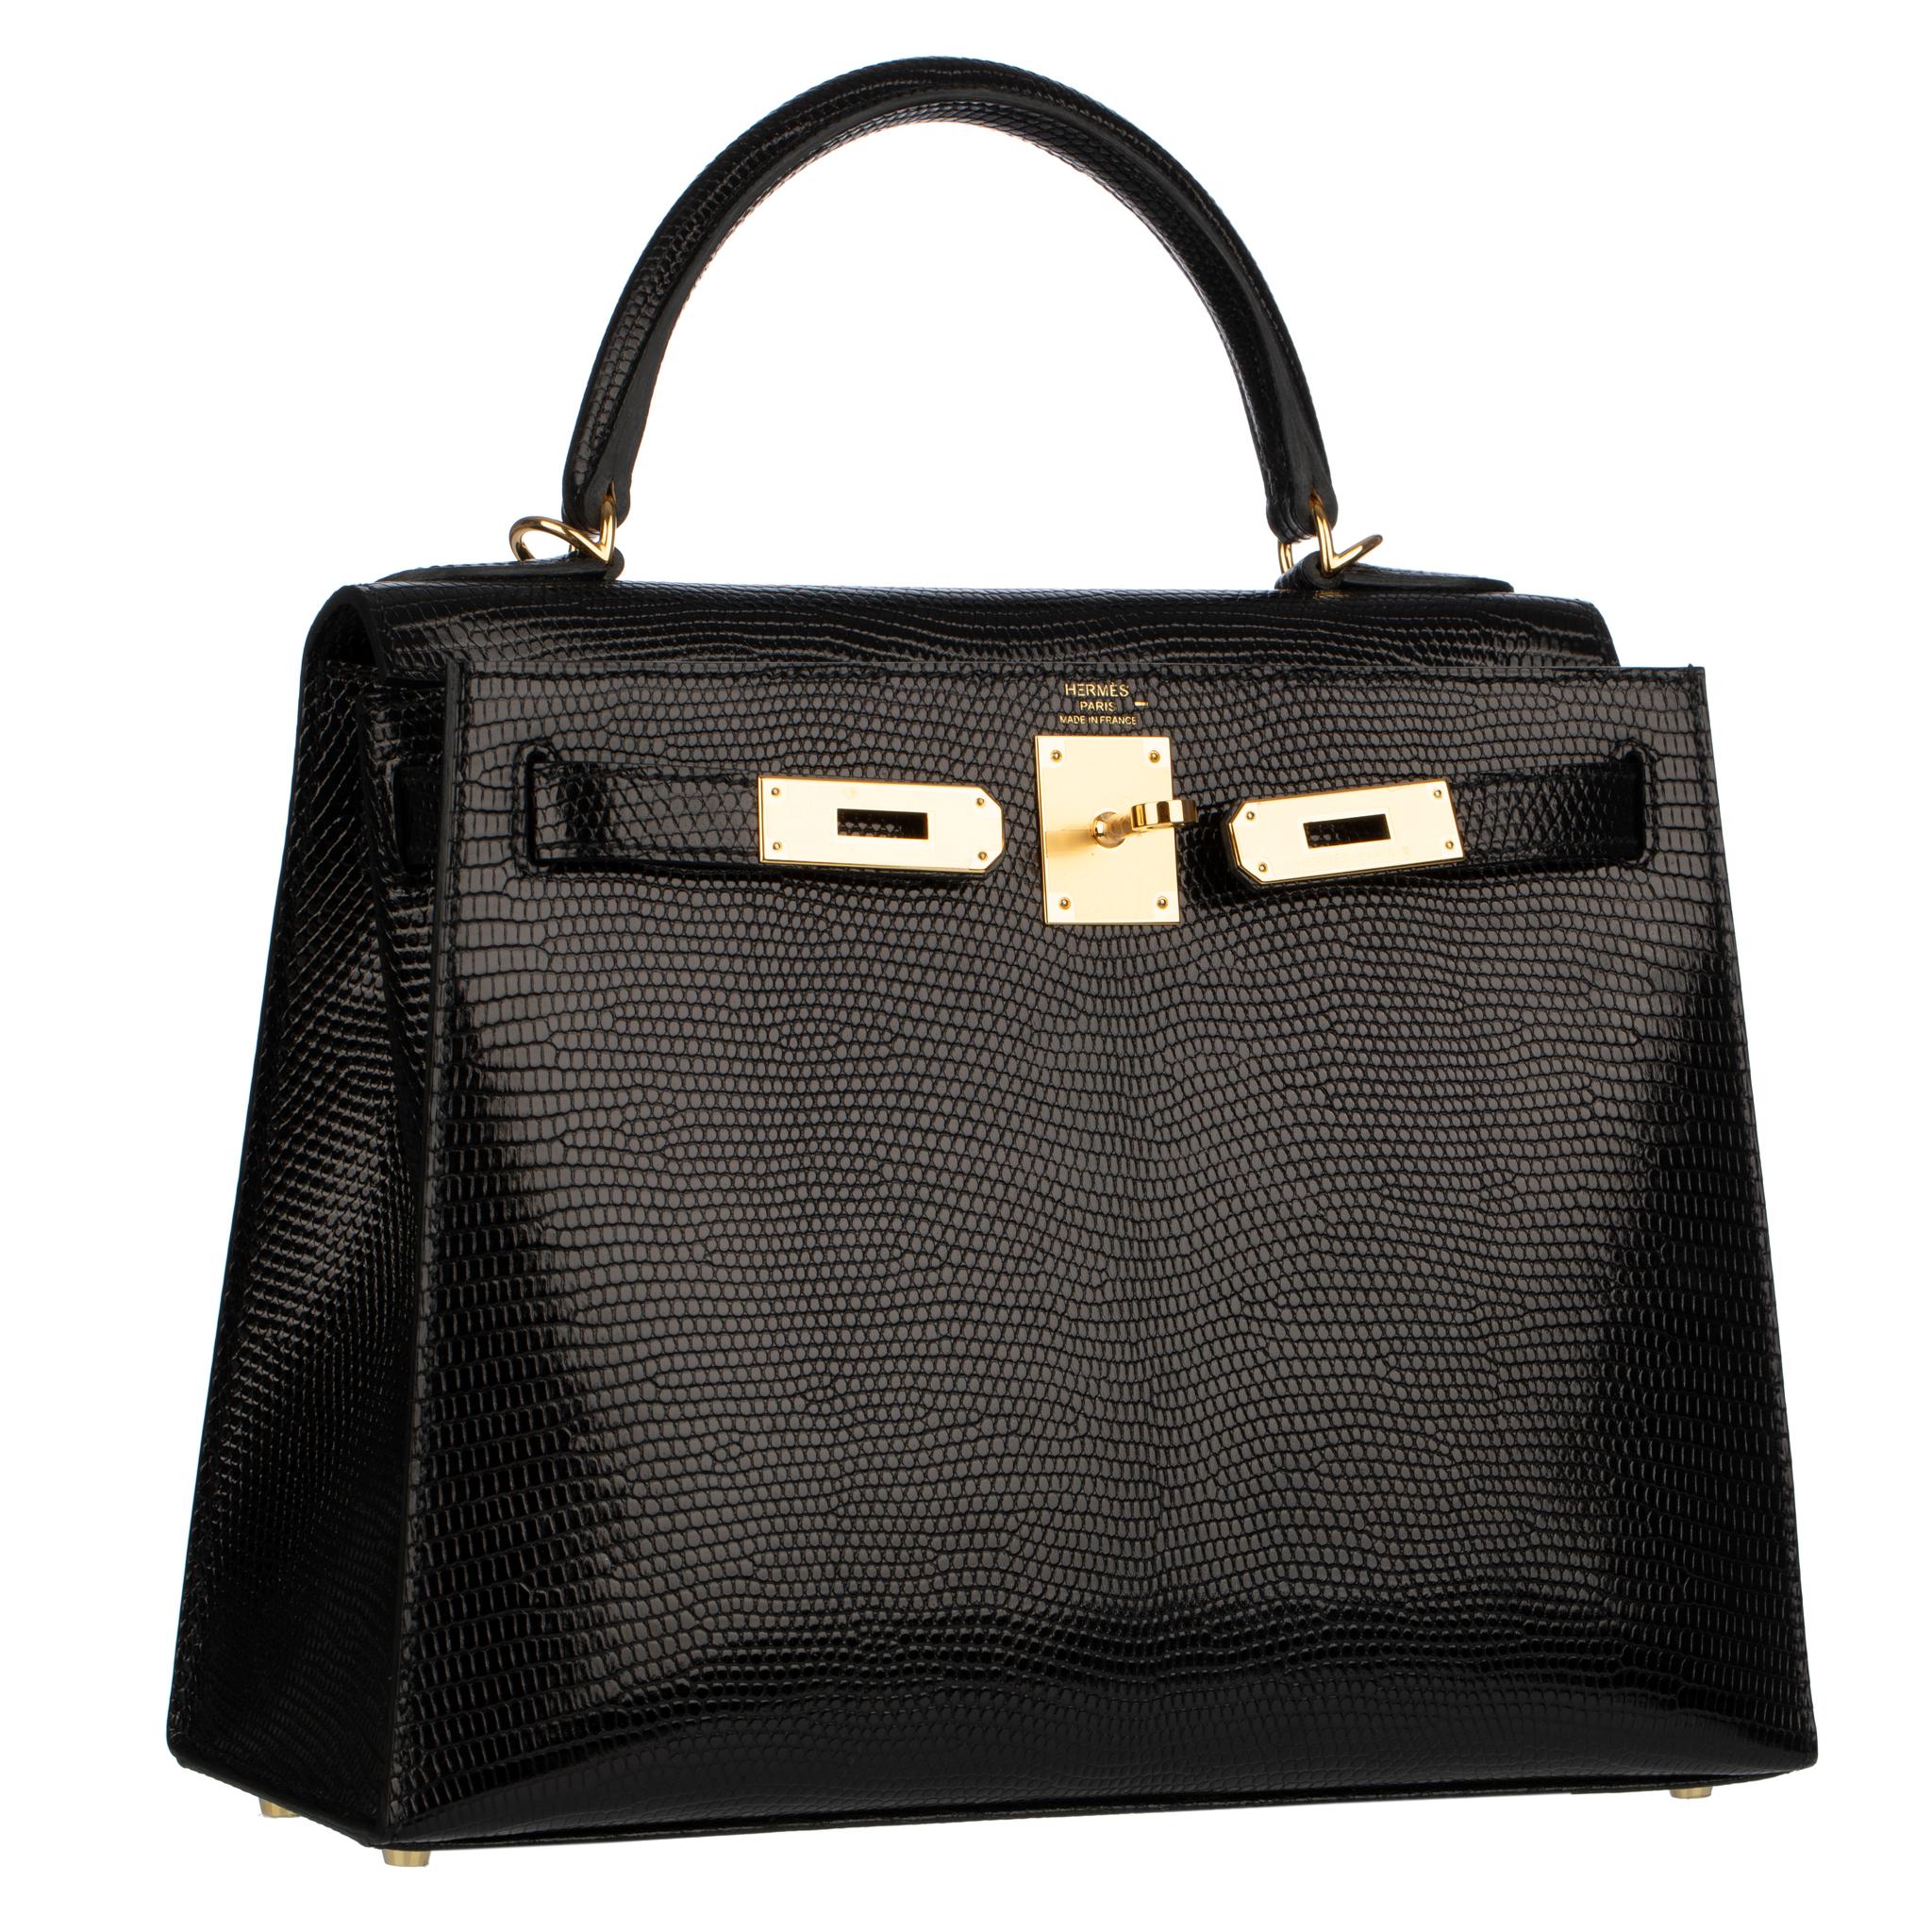 The Hermes Kelly 28cm in Black Lizard Leather with Gold Hardware is an embodiment of unparalleled luxury and sophistication.

Exquisitely crafted by Hermes artisans, this iconic bag showcases the epitome of elegance. The Black Lizard Leather, known